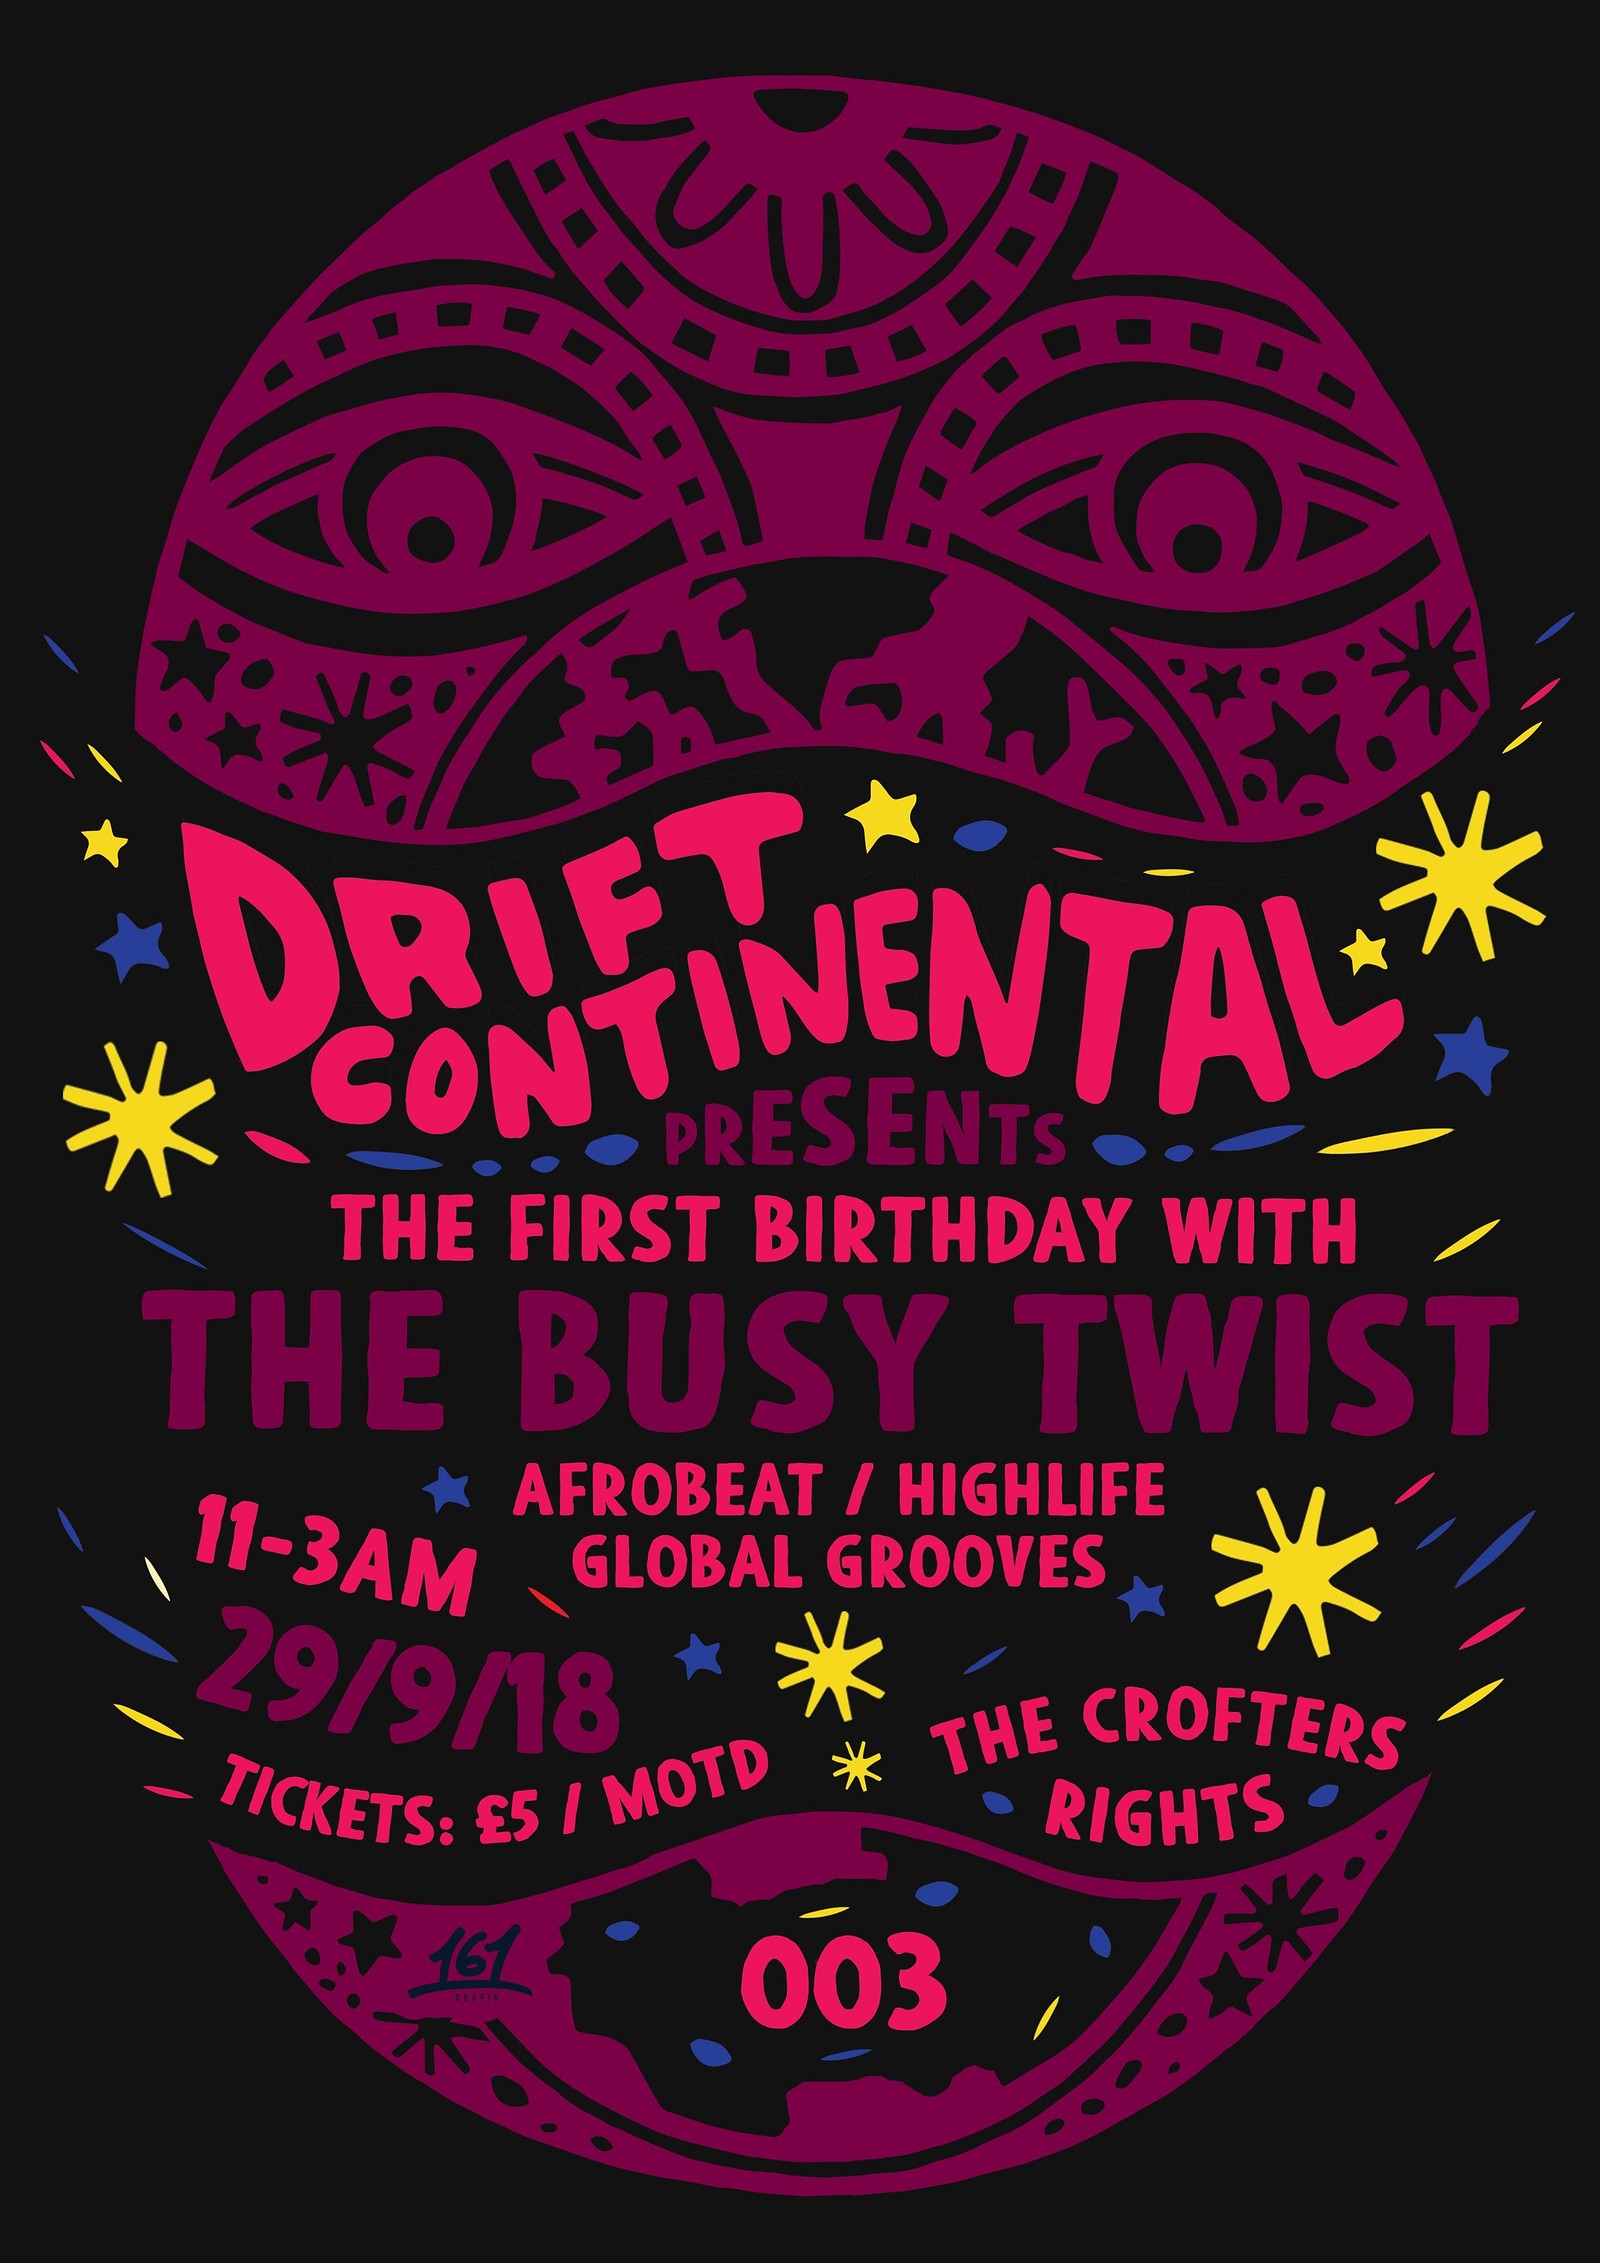 Drift Continental Presents: The Busy Twist at Crofters Rights